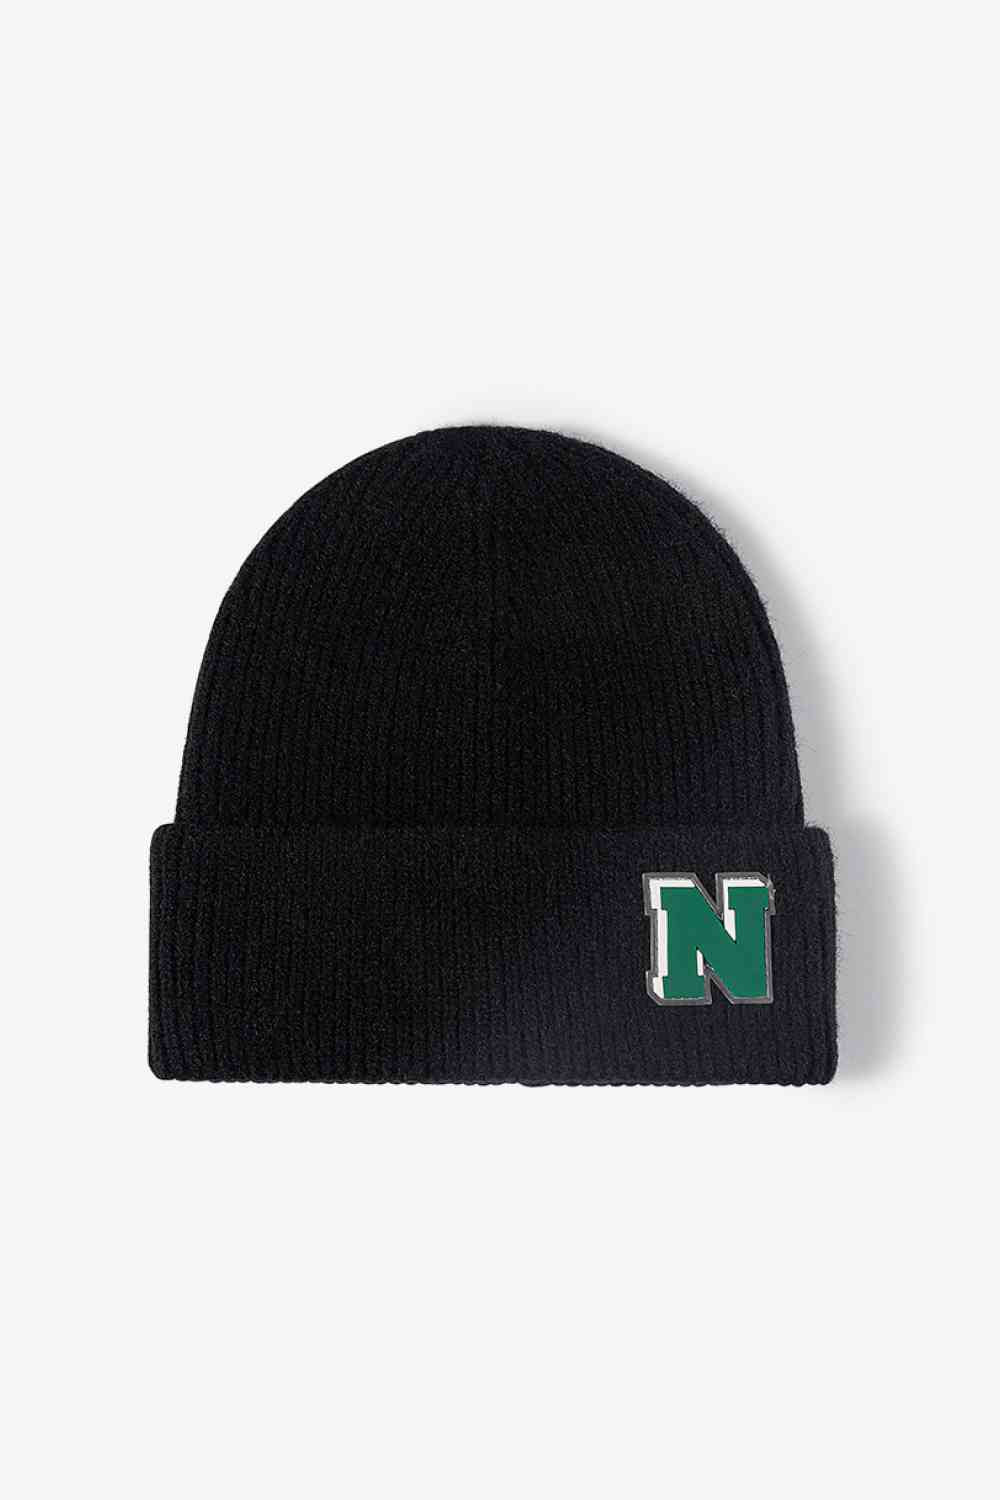 Letter N Patch Cuffed Knit Beanie Black One Size